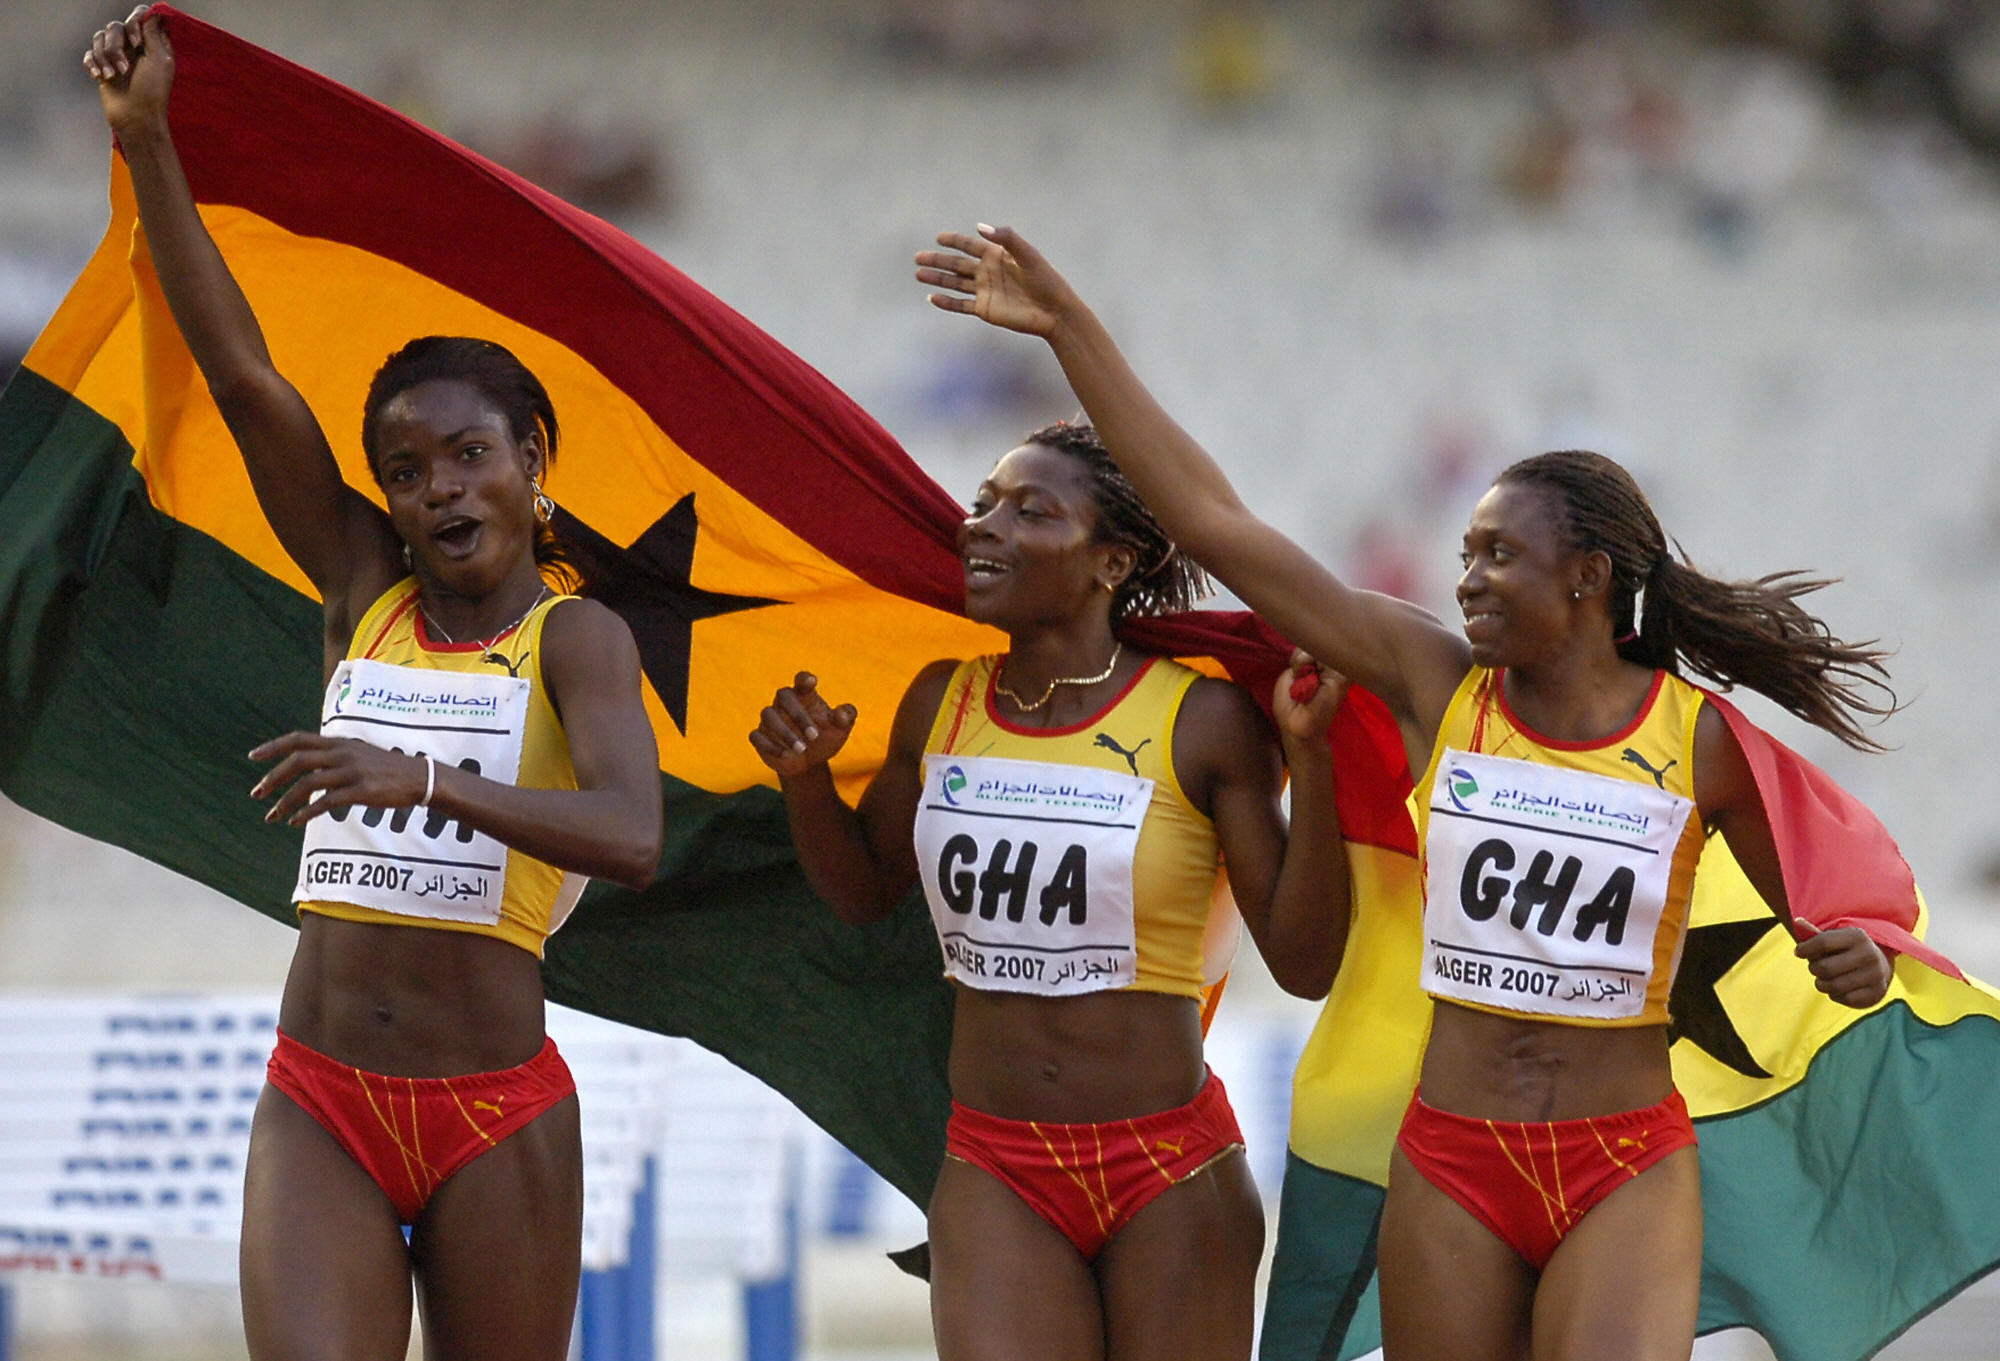 The Accra 2023 Organising Committee is planning on organising overseas training camps for athletes ©Getty Images